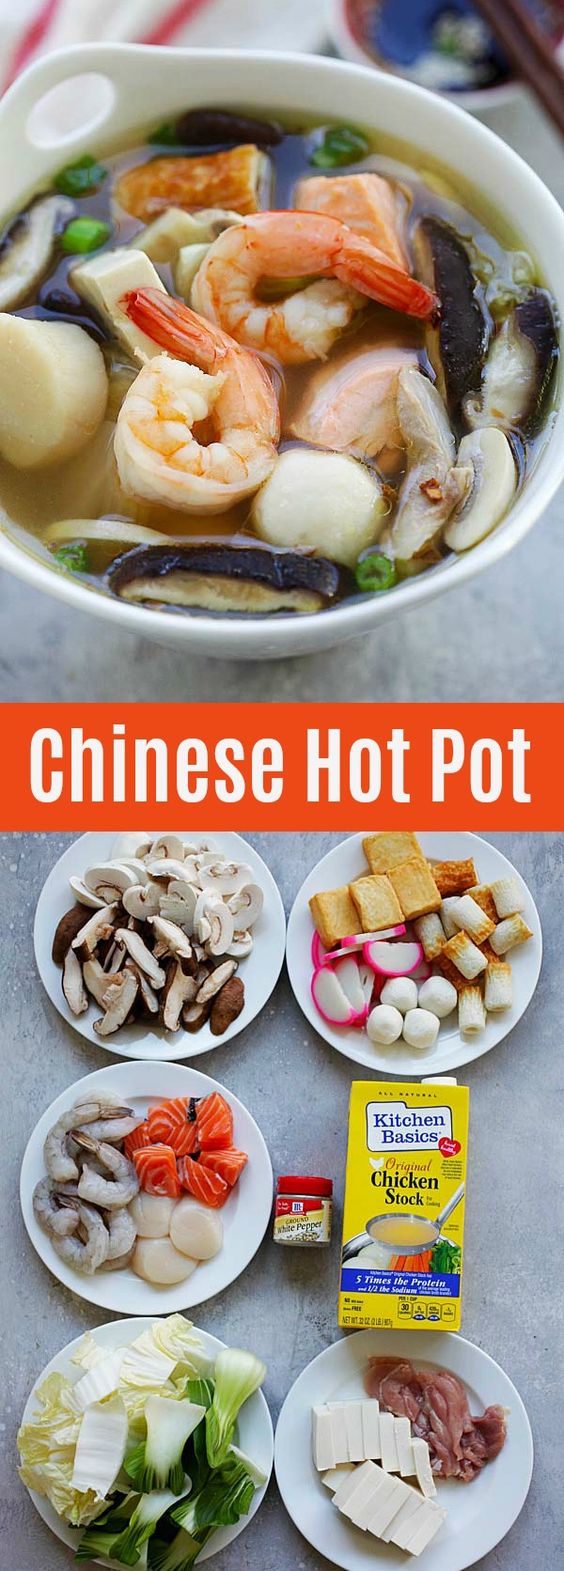 Chinese Hot Pot - hearty soup with a variety of fresh ingredients in a simmering pot of soup stock. Hot Pot is so good especially during winter months | rasamalaysia.com